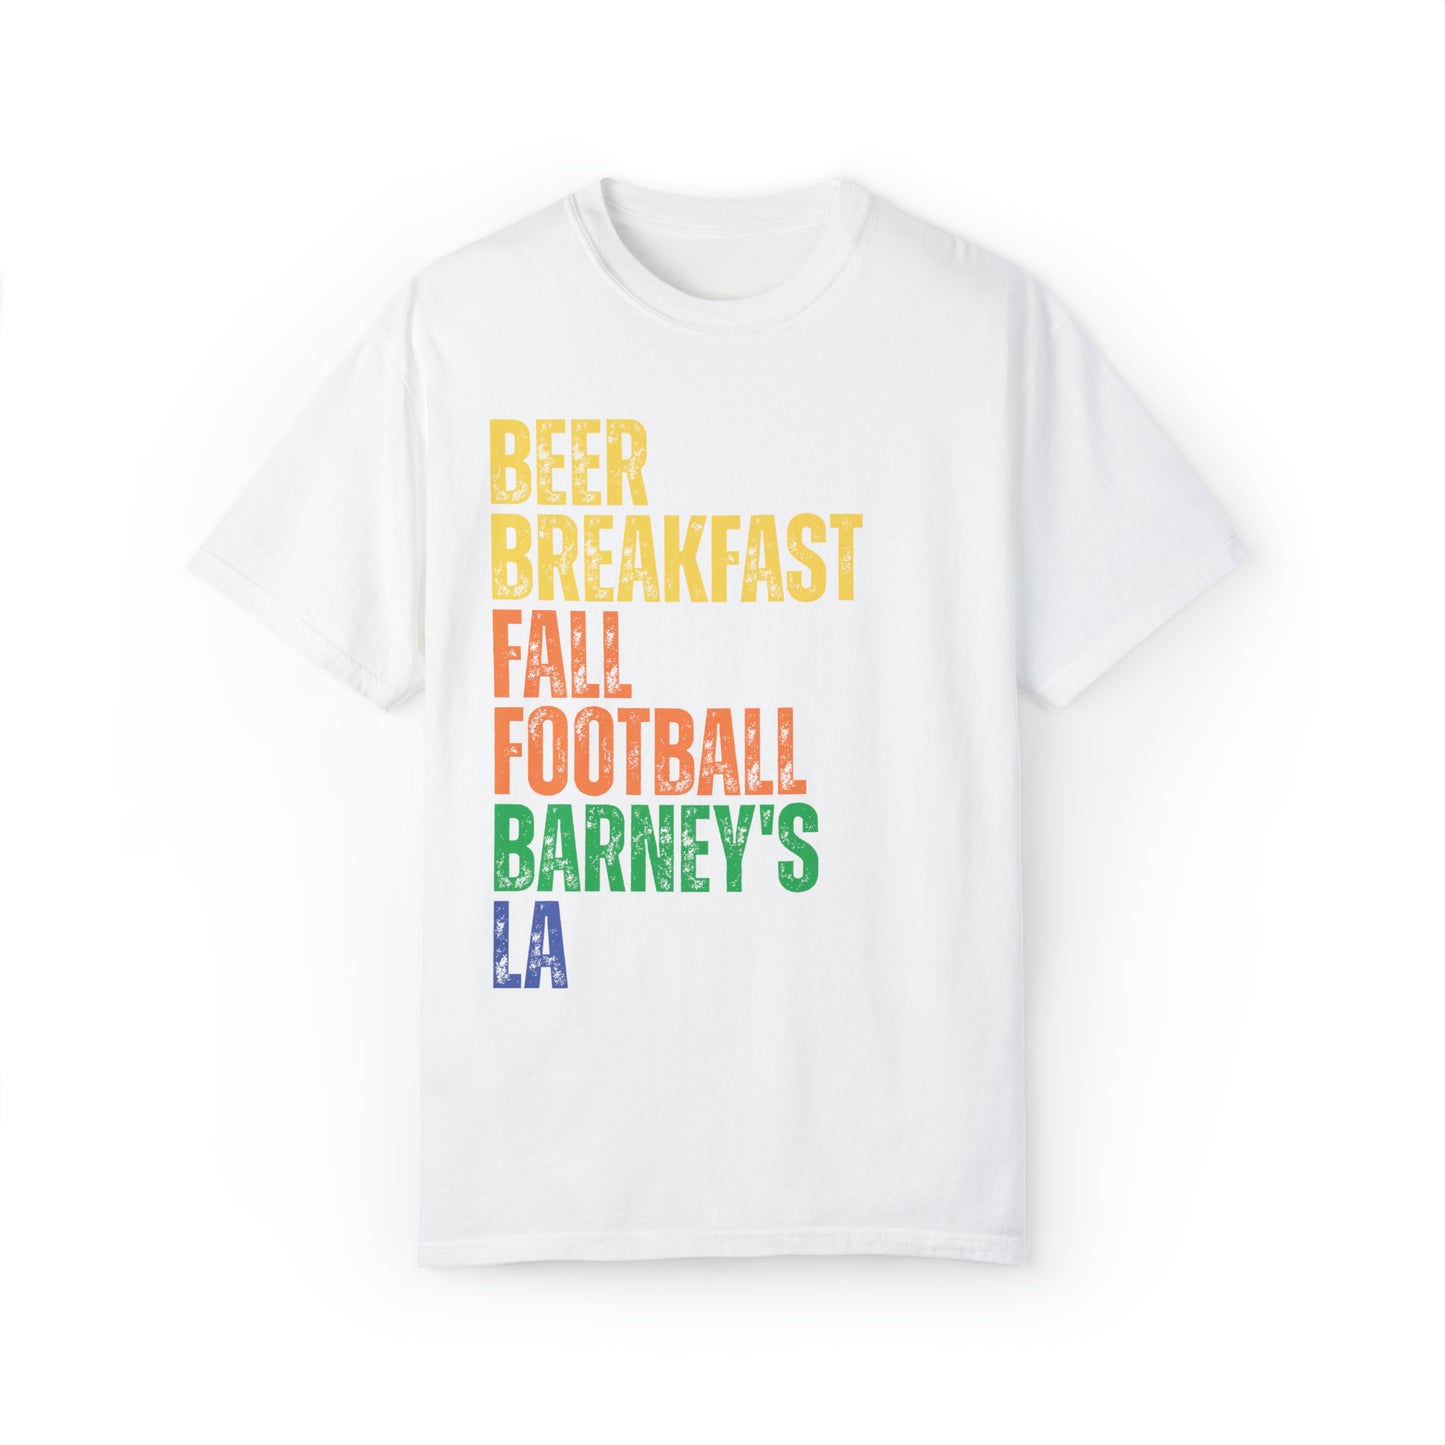 Beer Breakfast Fall Football | BARNEY'S BEANERY - Men's Graphic Tee | White Comfort Colors 1717 T-Shirt, Front View Flat Lay